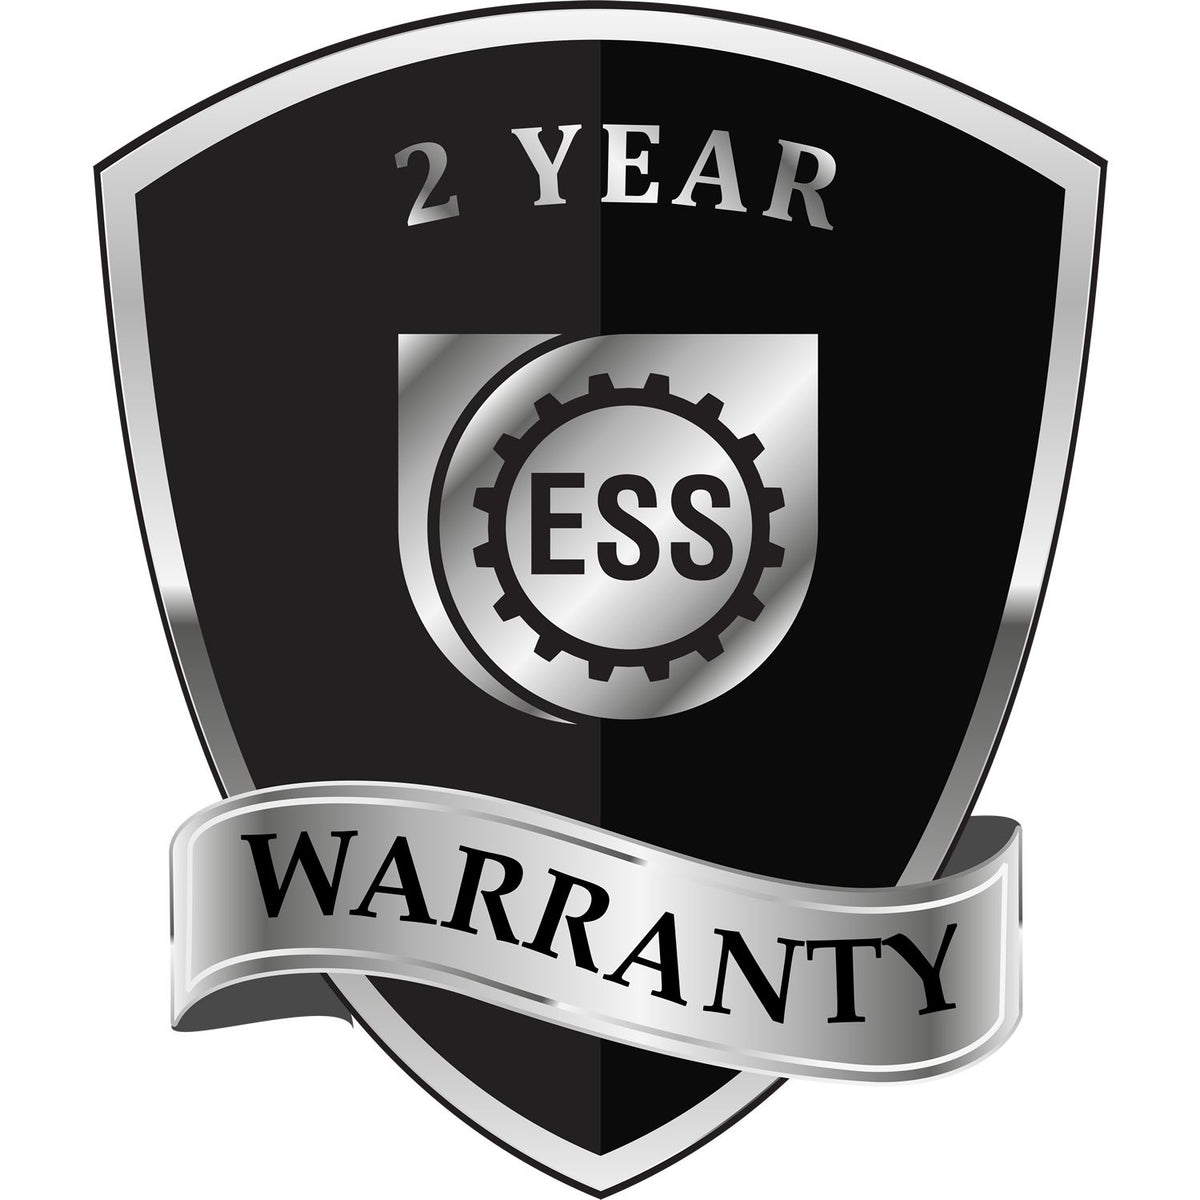 A badge or emblem showing a warranty icon for the State of Minnesota Architectural Seal Embosser